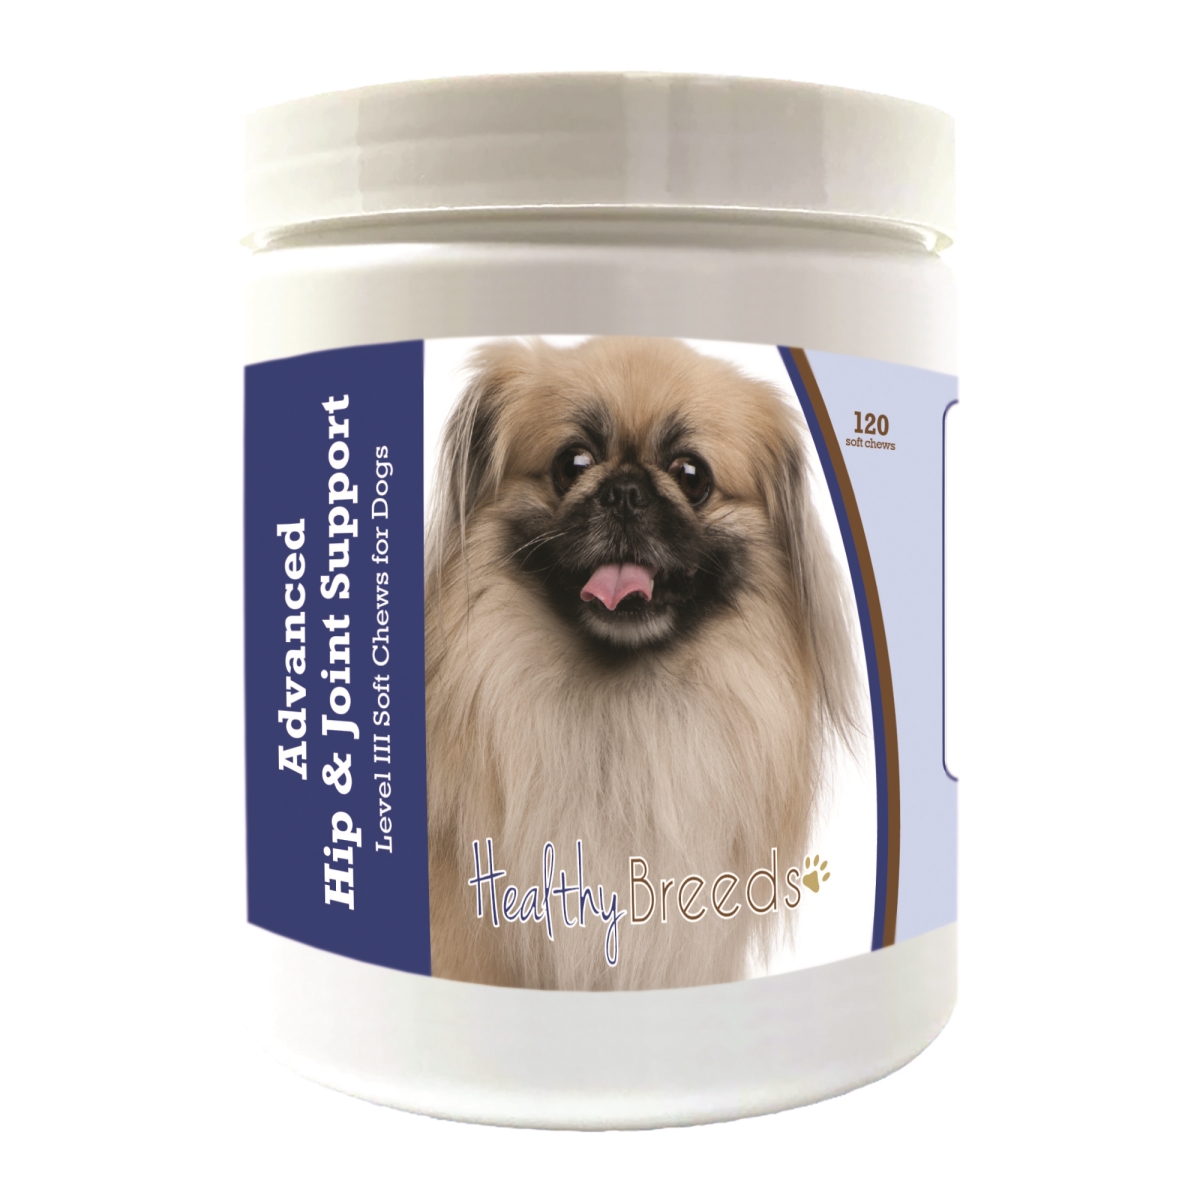 Picture of Healthy Breeds 192959898903 Pekingese Advanced Hip & Joint Support Level III Soft Chews for Dogs